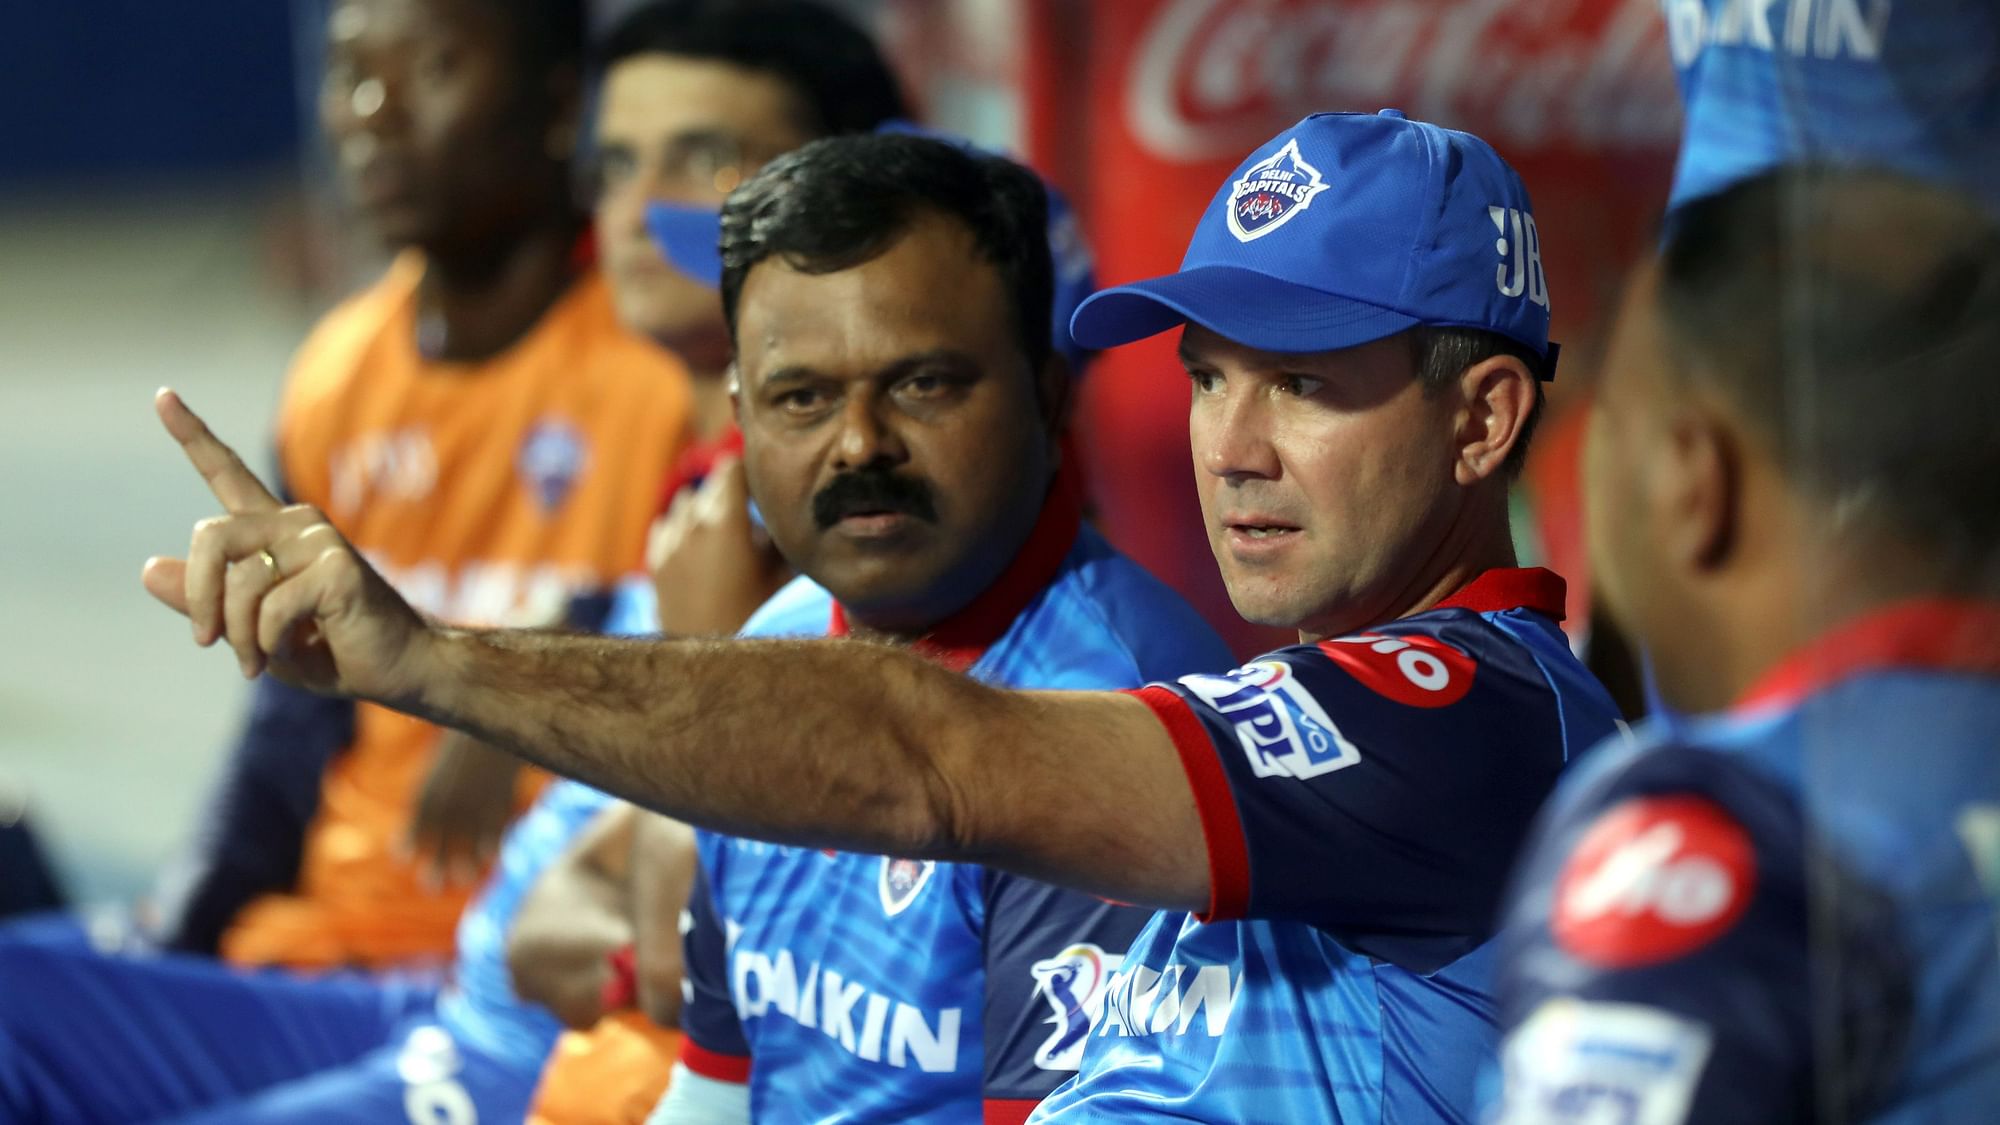 IPL 2019: Have to Keep Backing Talented Players, Says Delhi Capitals Coach Ponting